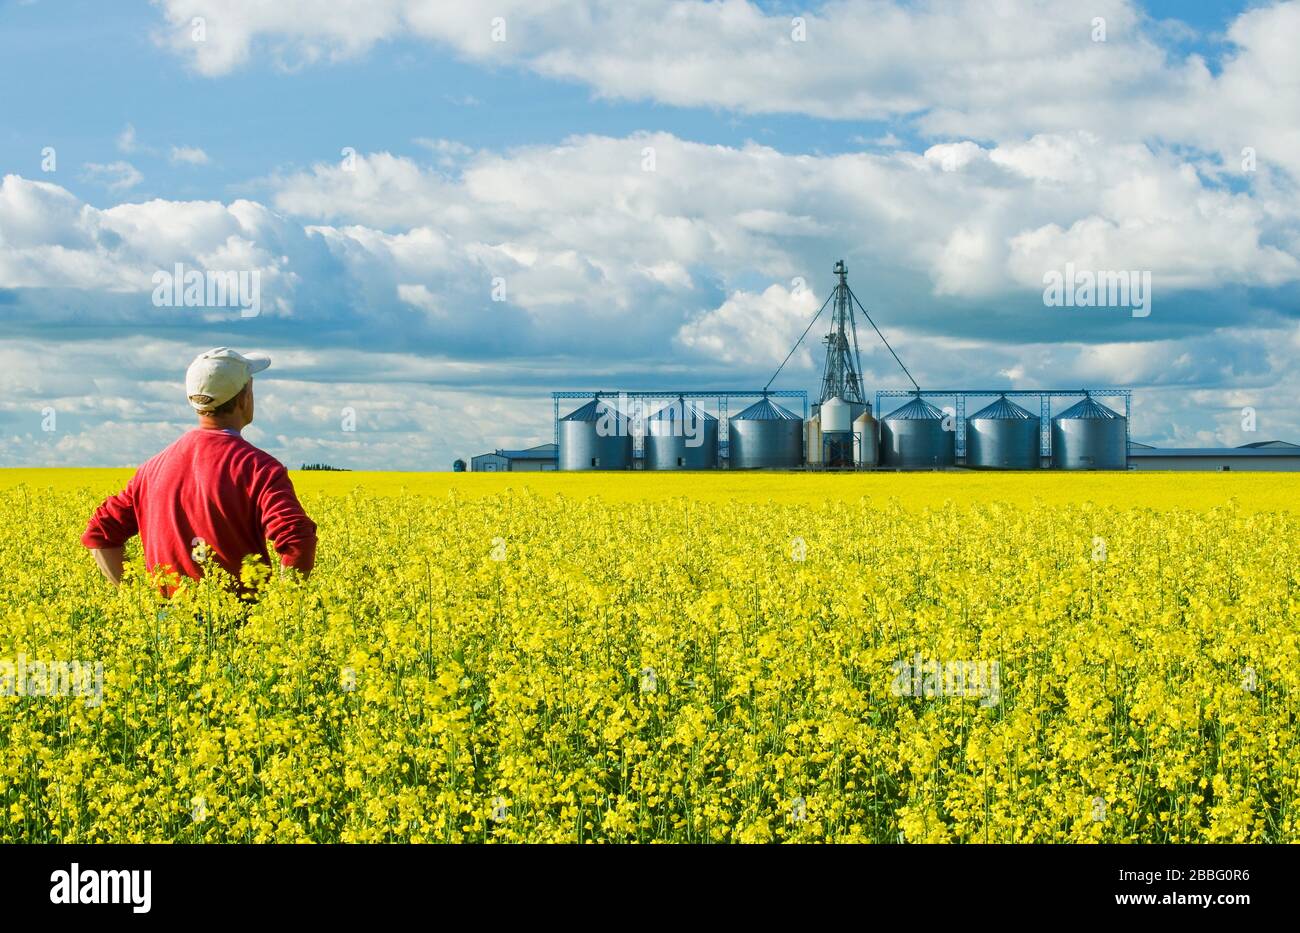 a farmer in a field of bloom stage canola with a grain handling structure, including storage bins(silos), in the background,  near Somerset, Manitoba, Canada Stock Photo